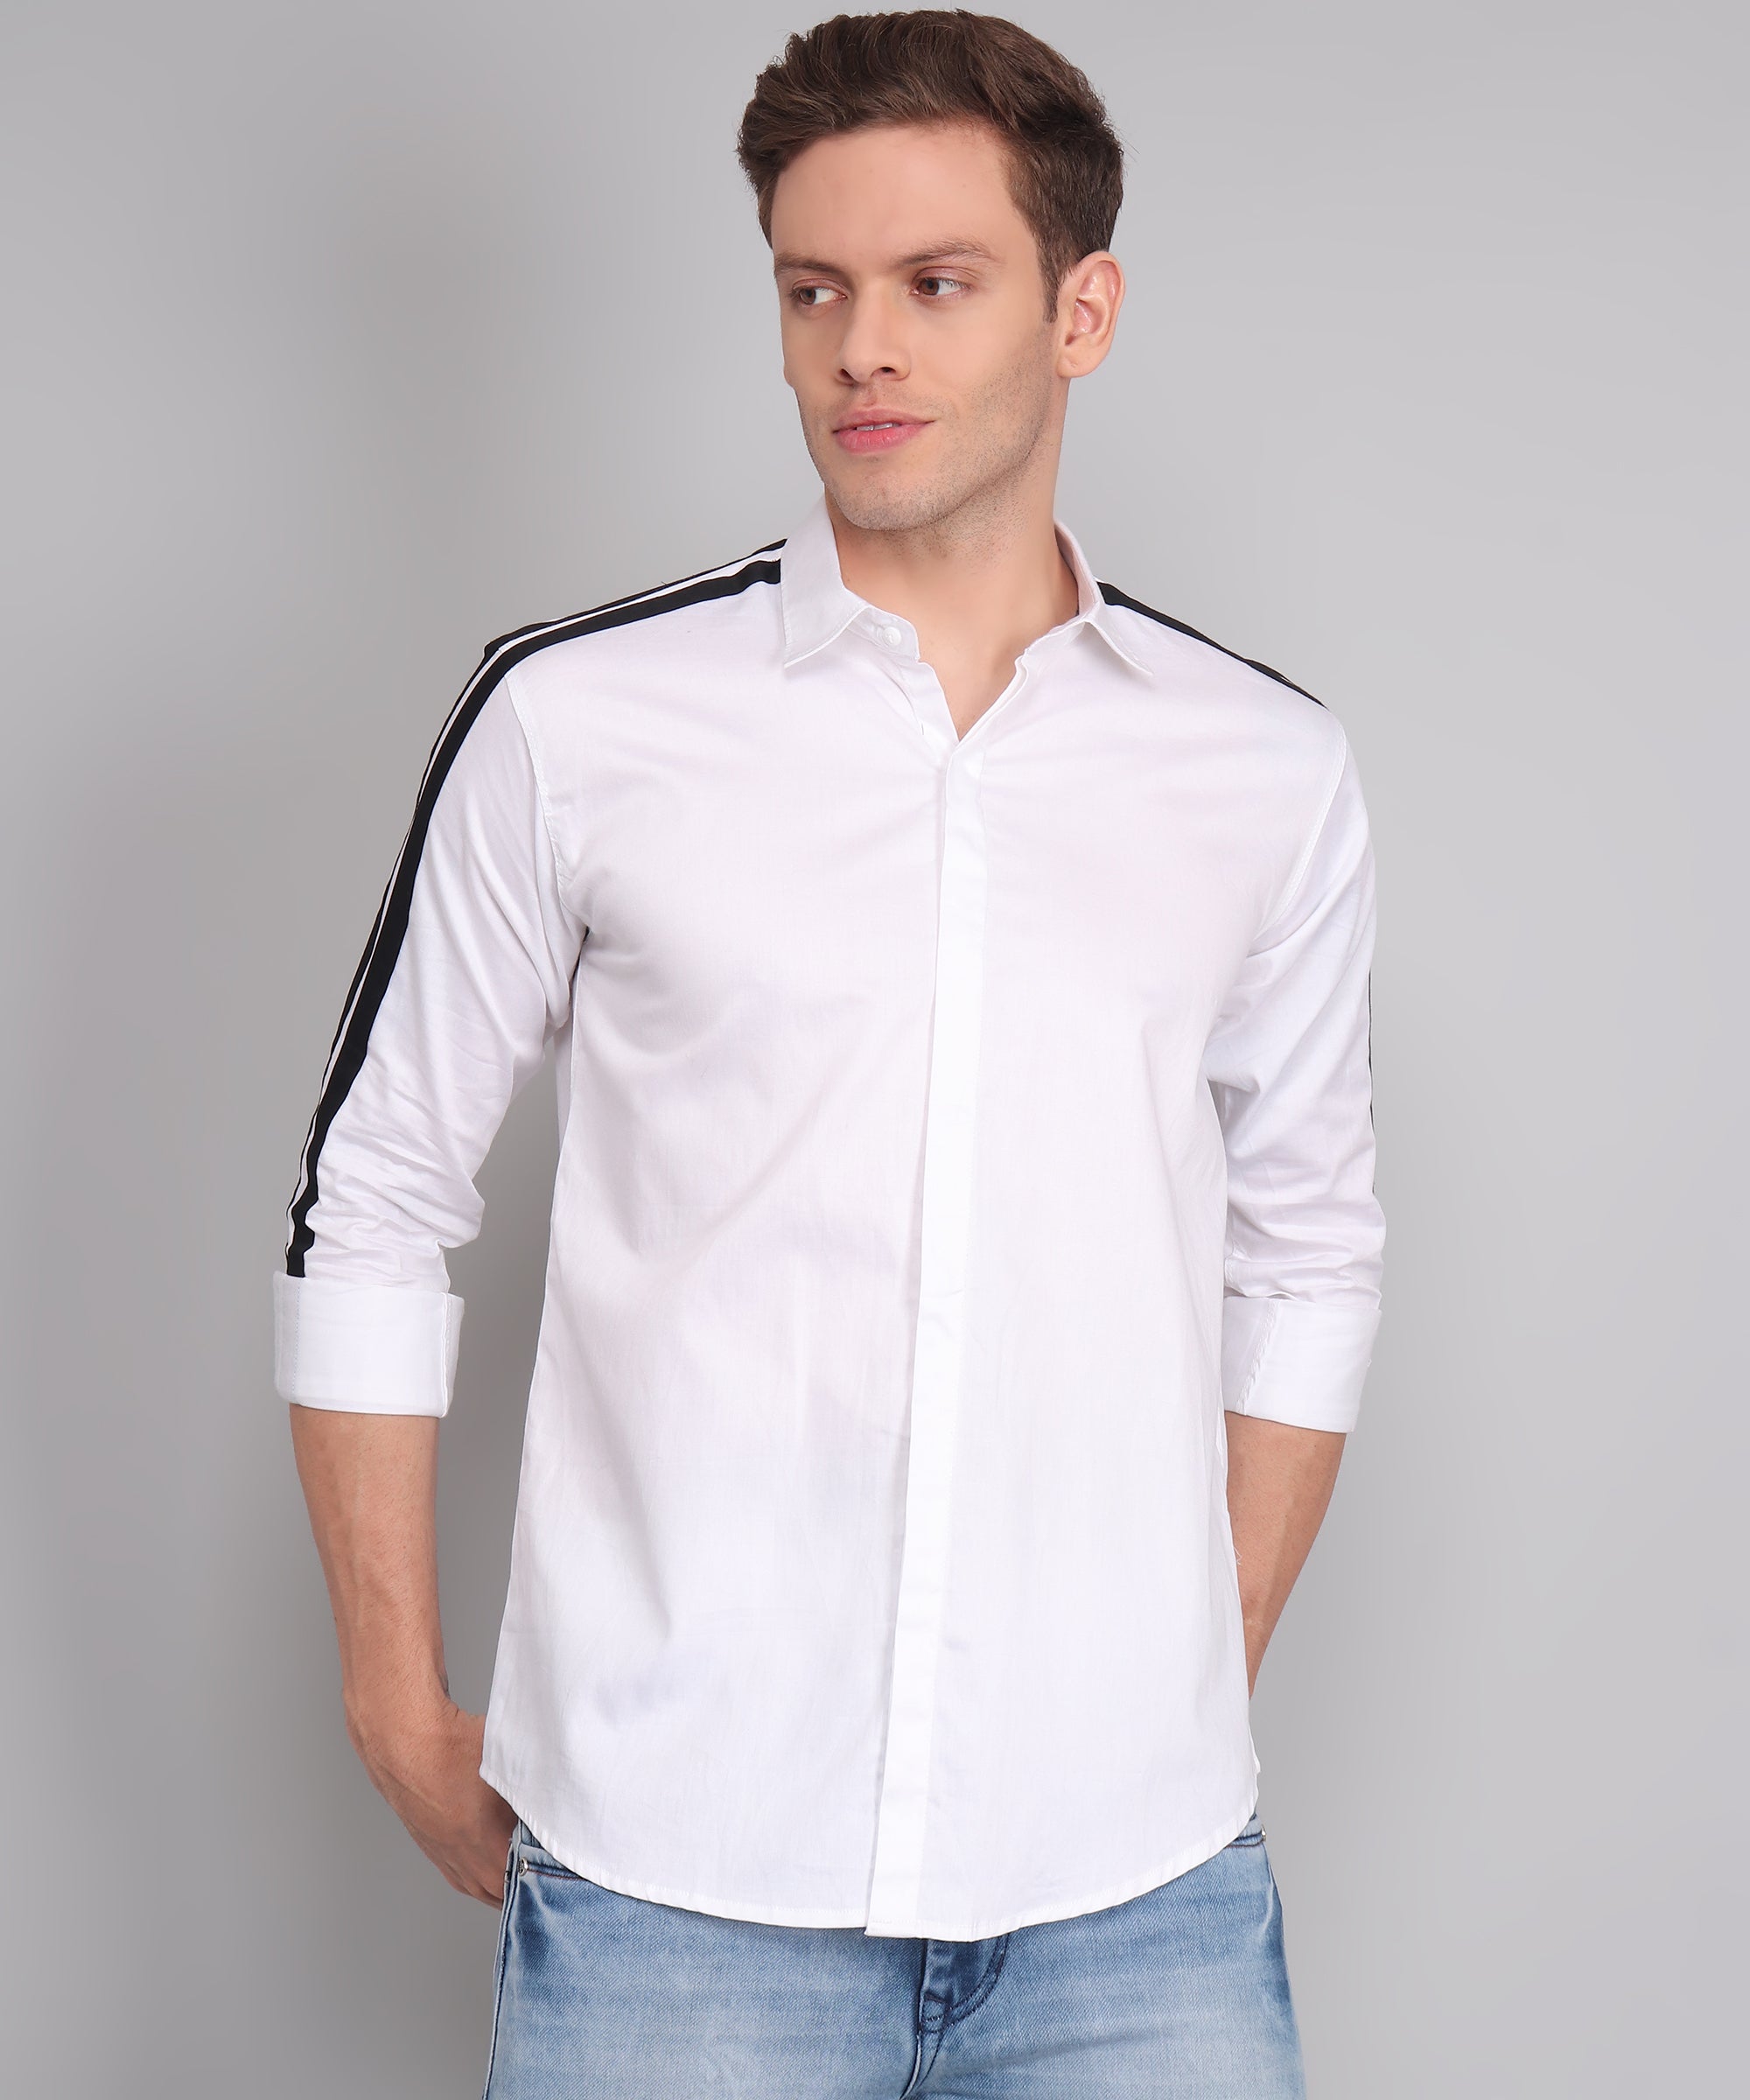 Harmony in Fibers: Exploring the Timeless Allure of Blended Linen Fabric Shirts